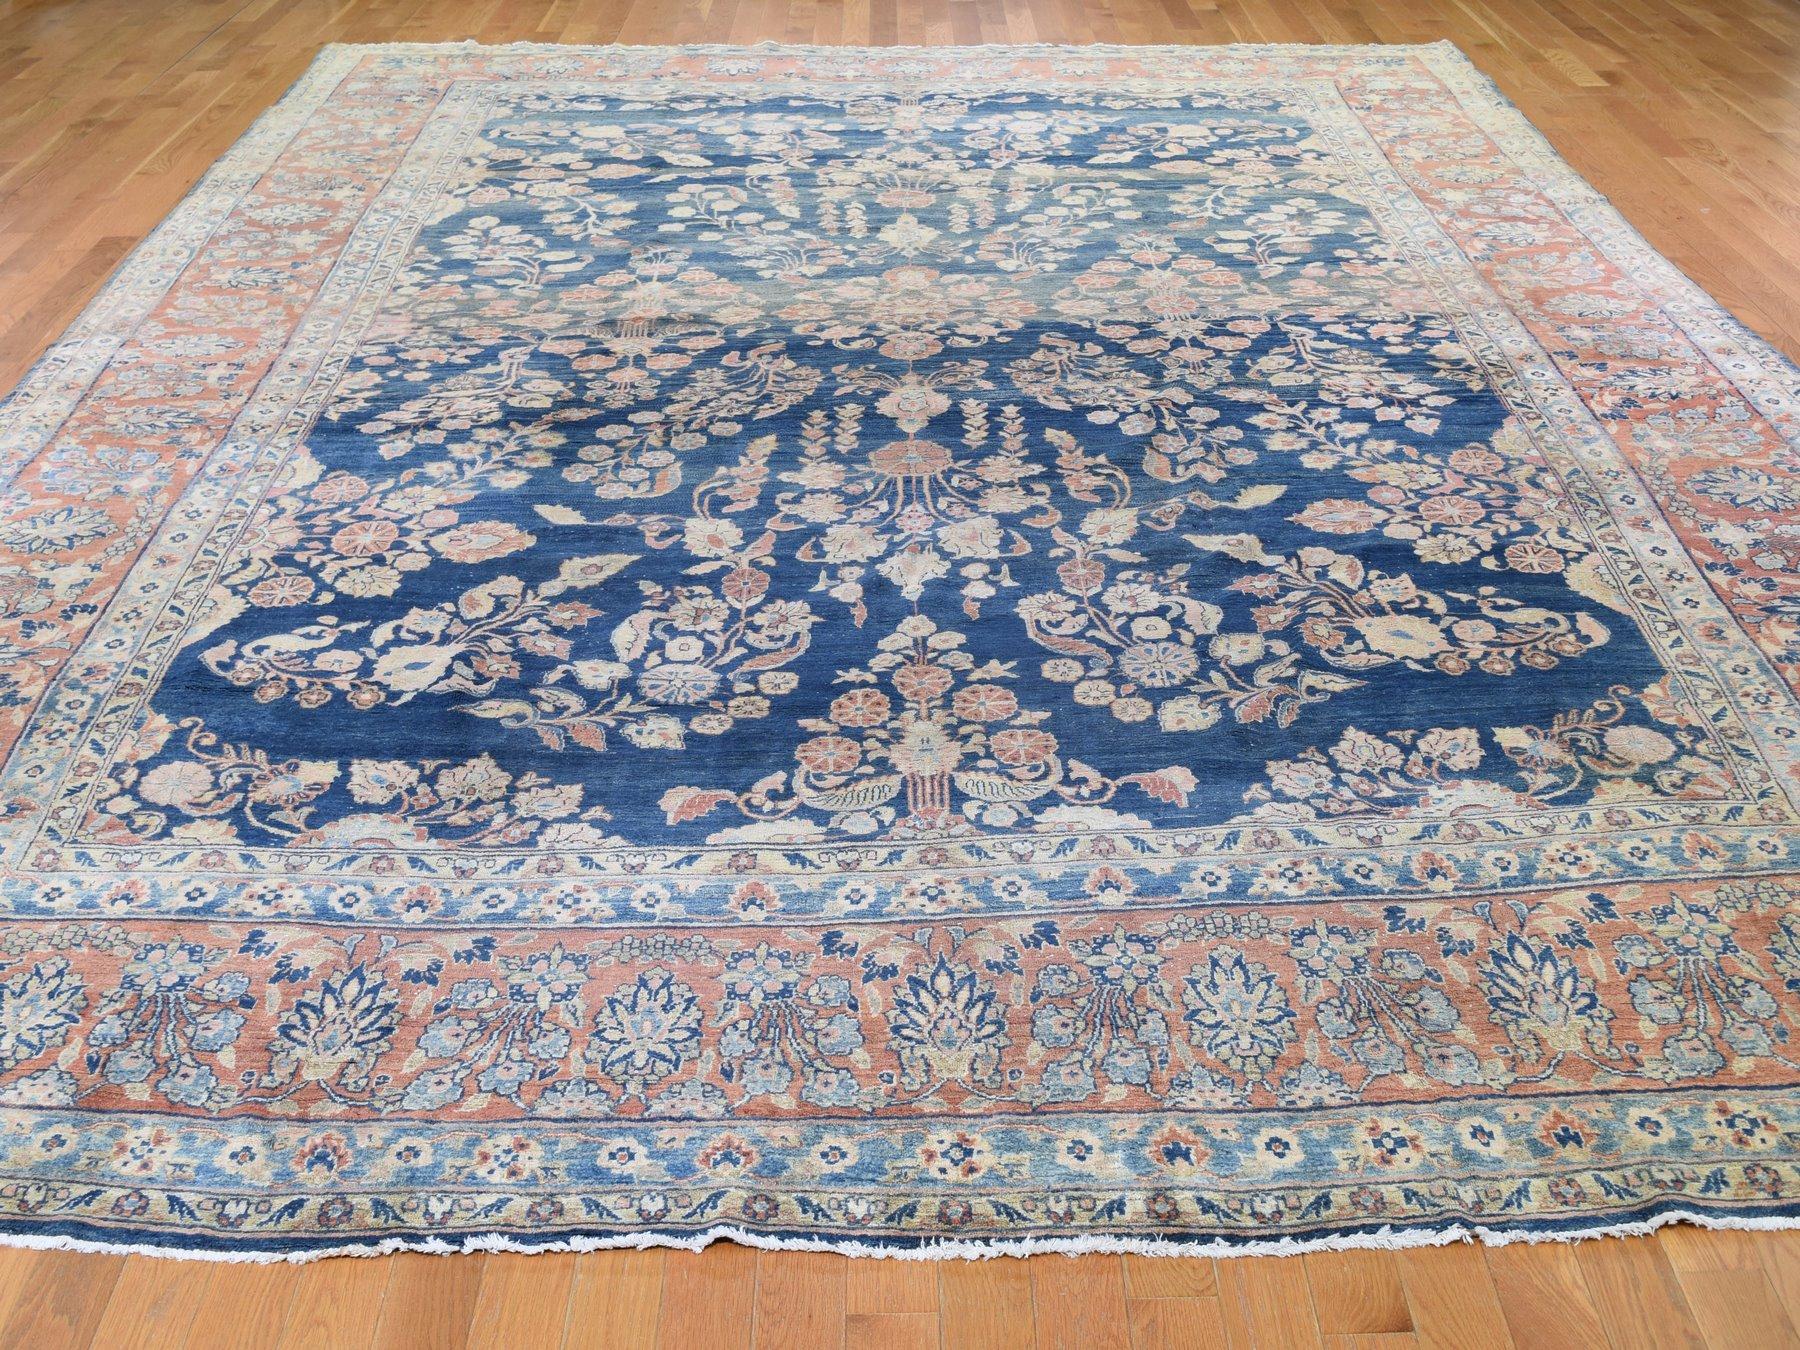 Medieval Blue Antique Persian Mohojaren Sarouk Full Soft Pile Abrush Hand Knotted